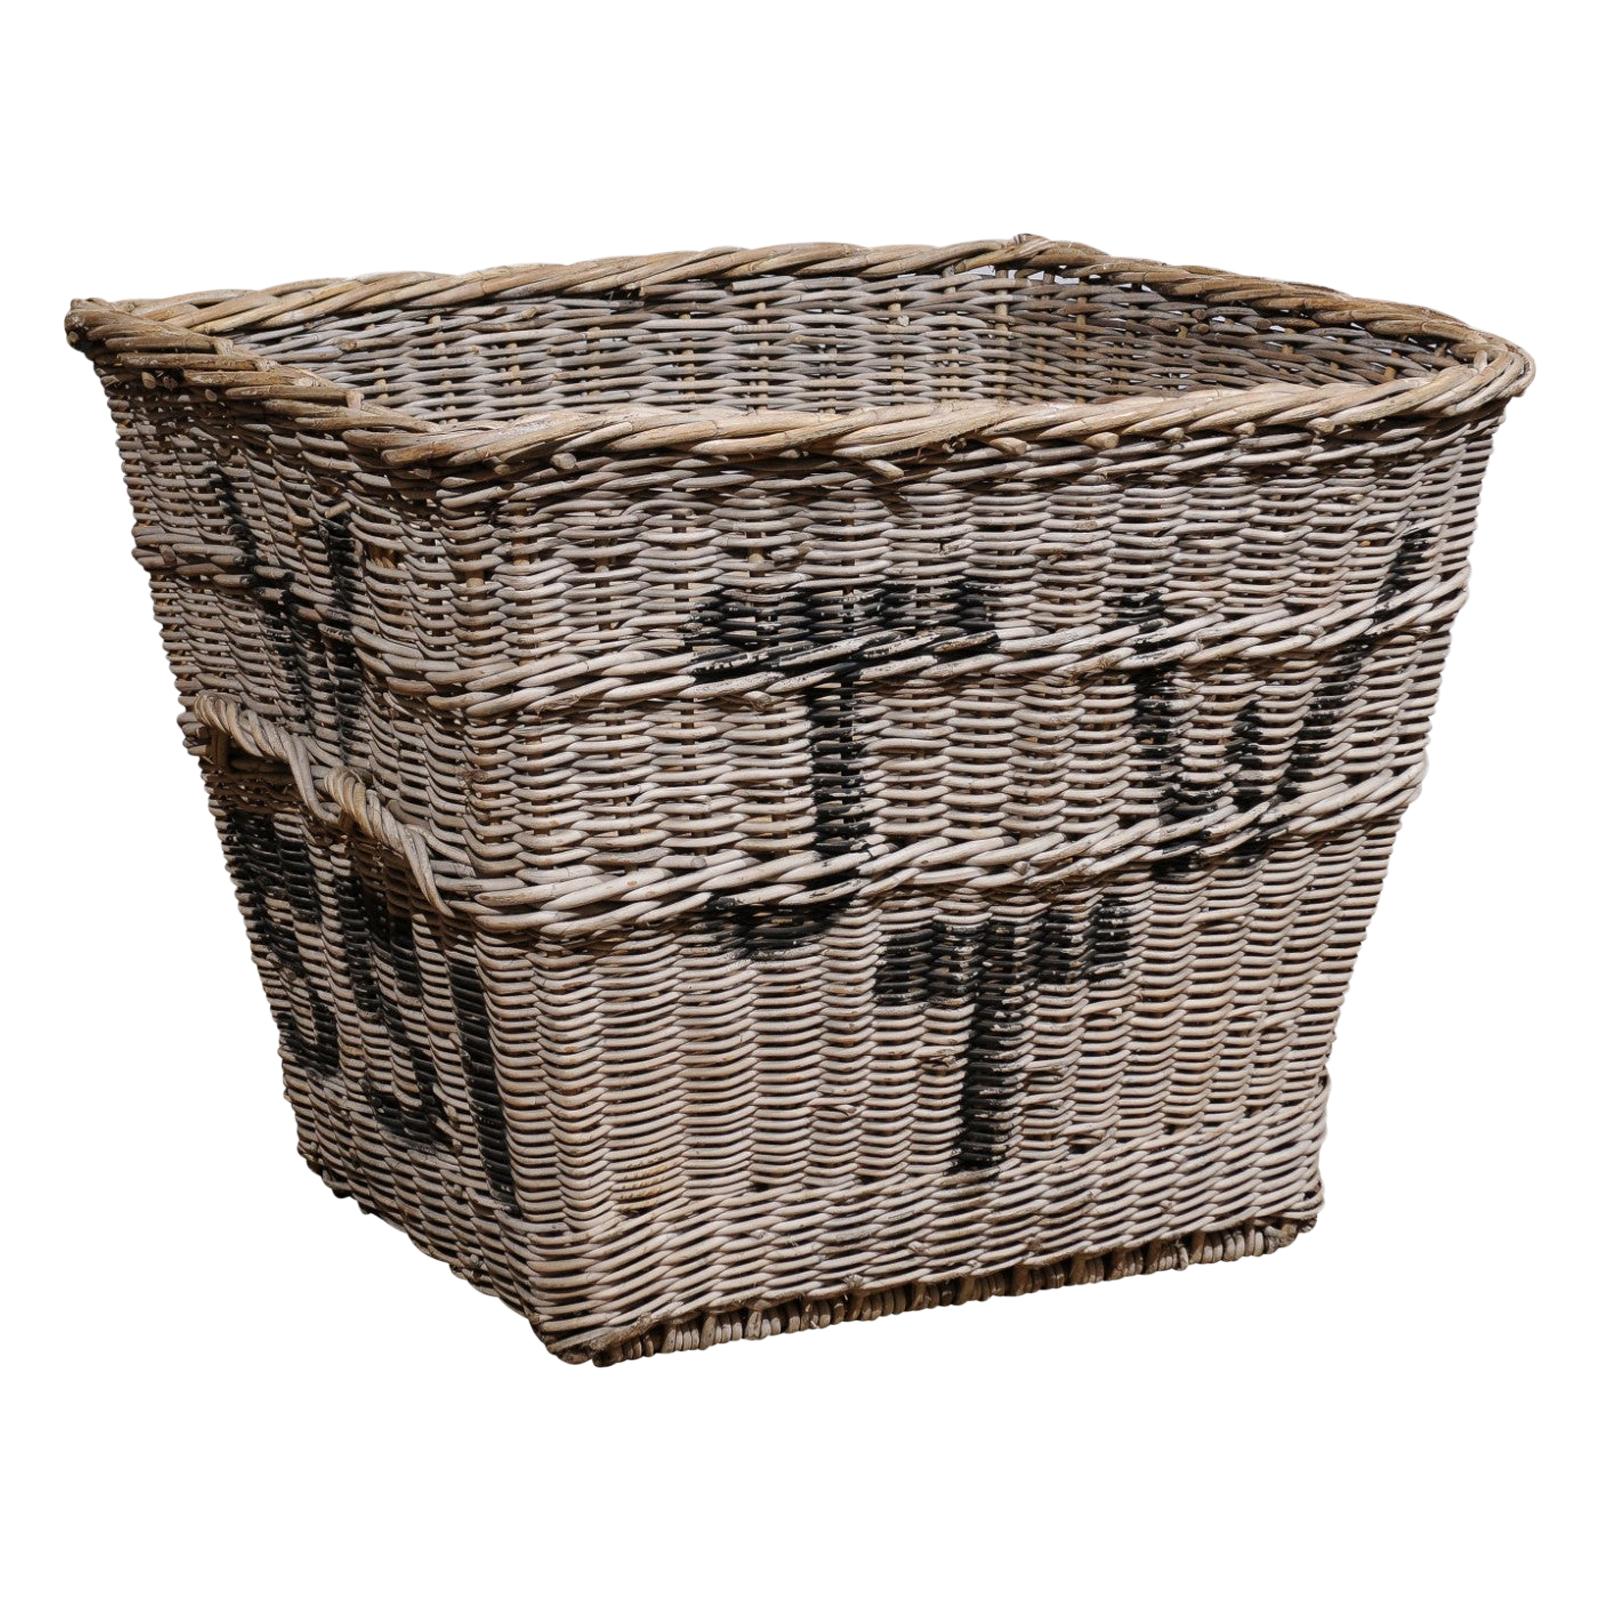 English 19th Century Reclaimed Wicker Mill Basket with Weathered Appearance